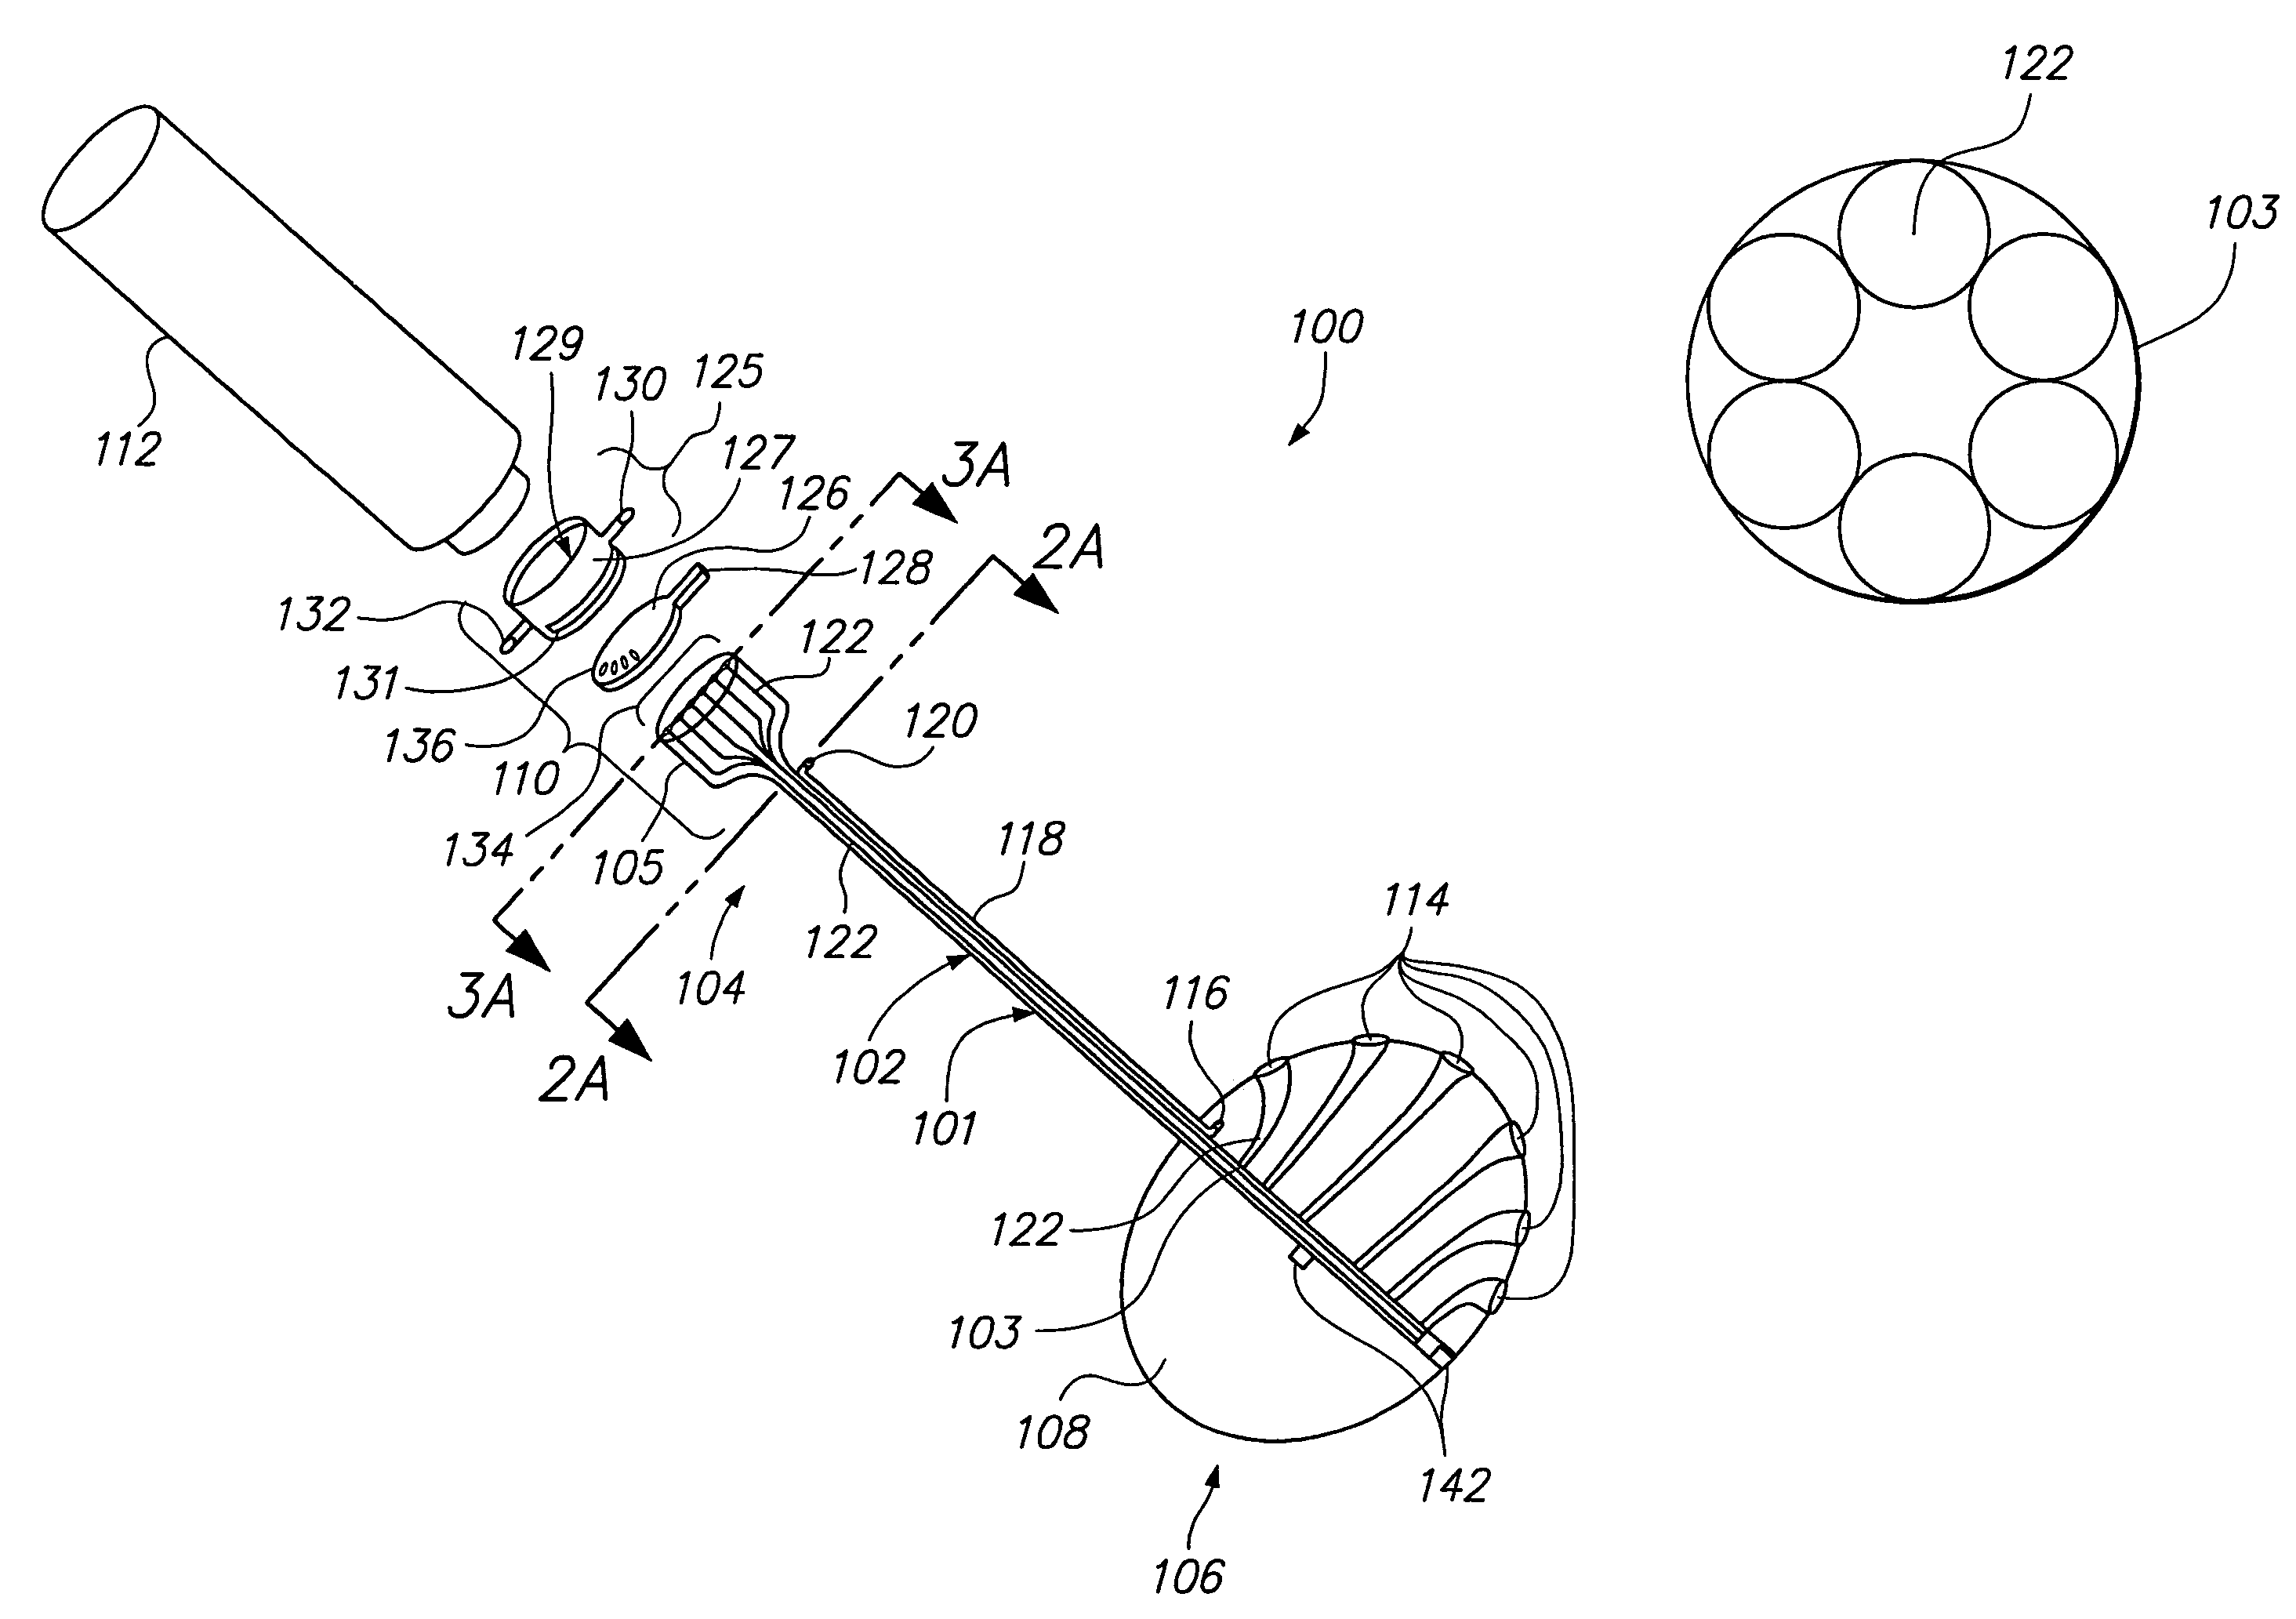 Targeted drug delivery device and method